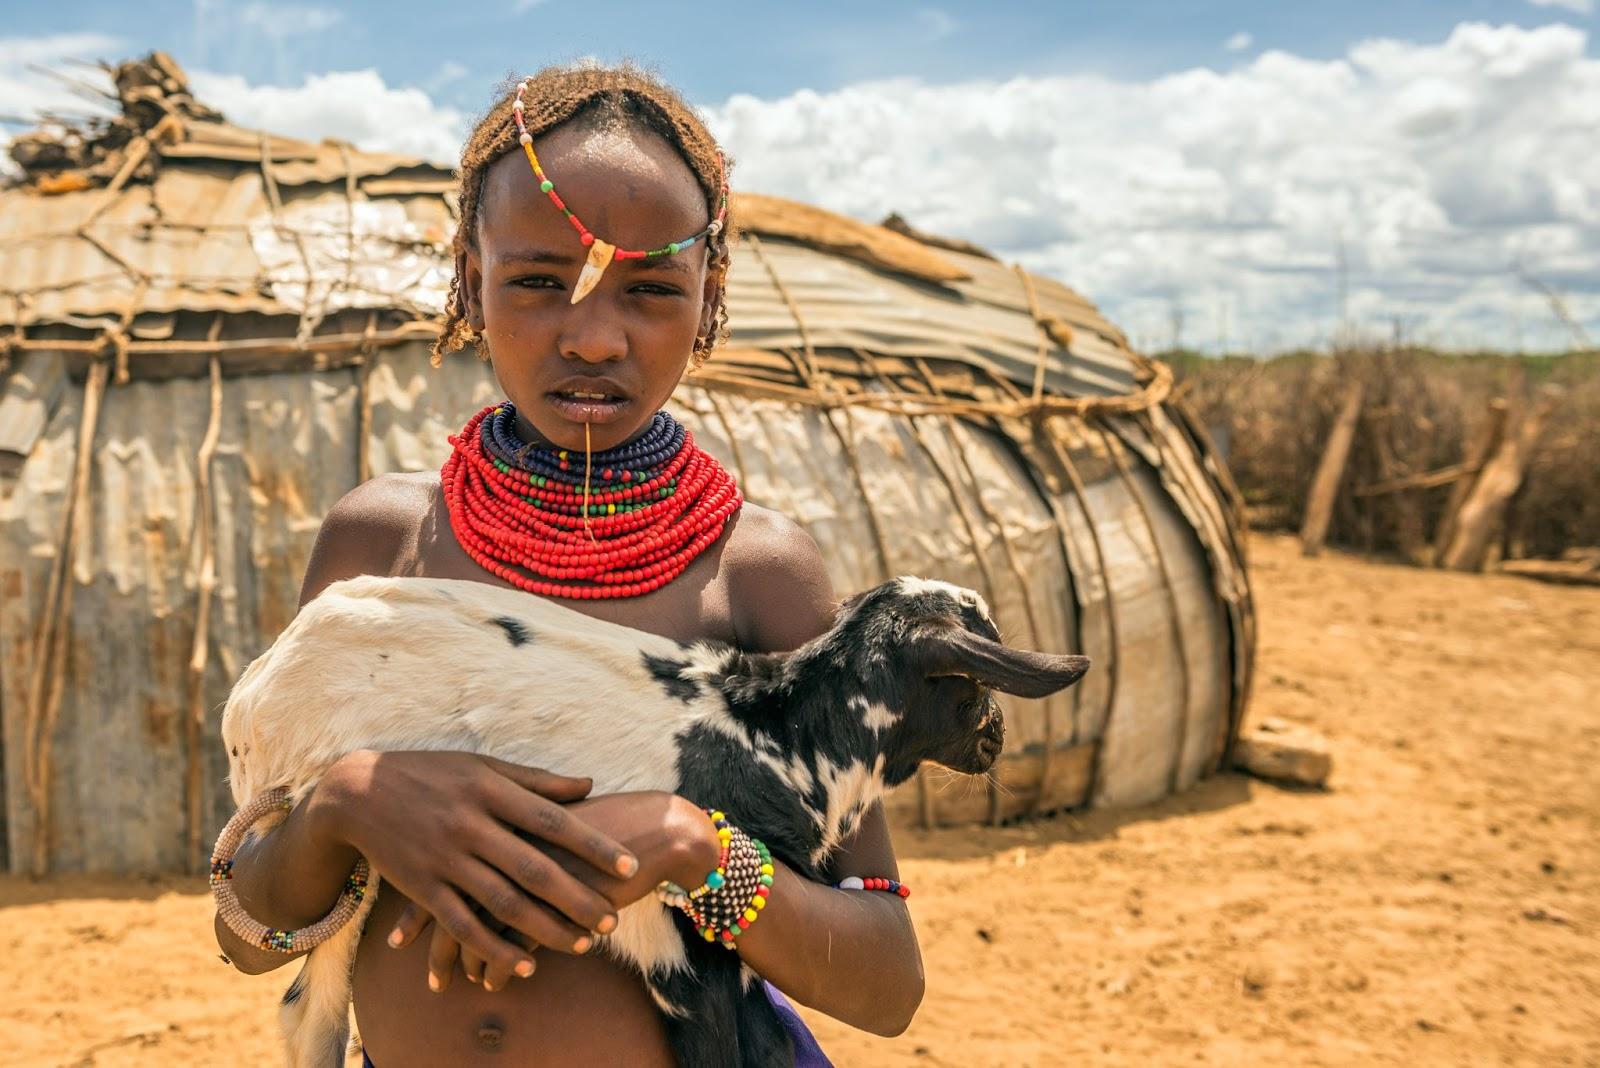 Girl from the Ethiopian tribe Dasanesh holding a goat in her village